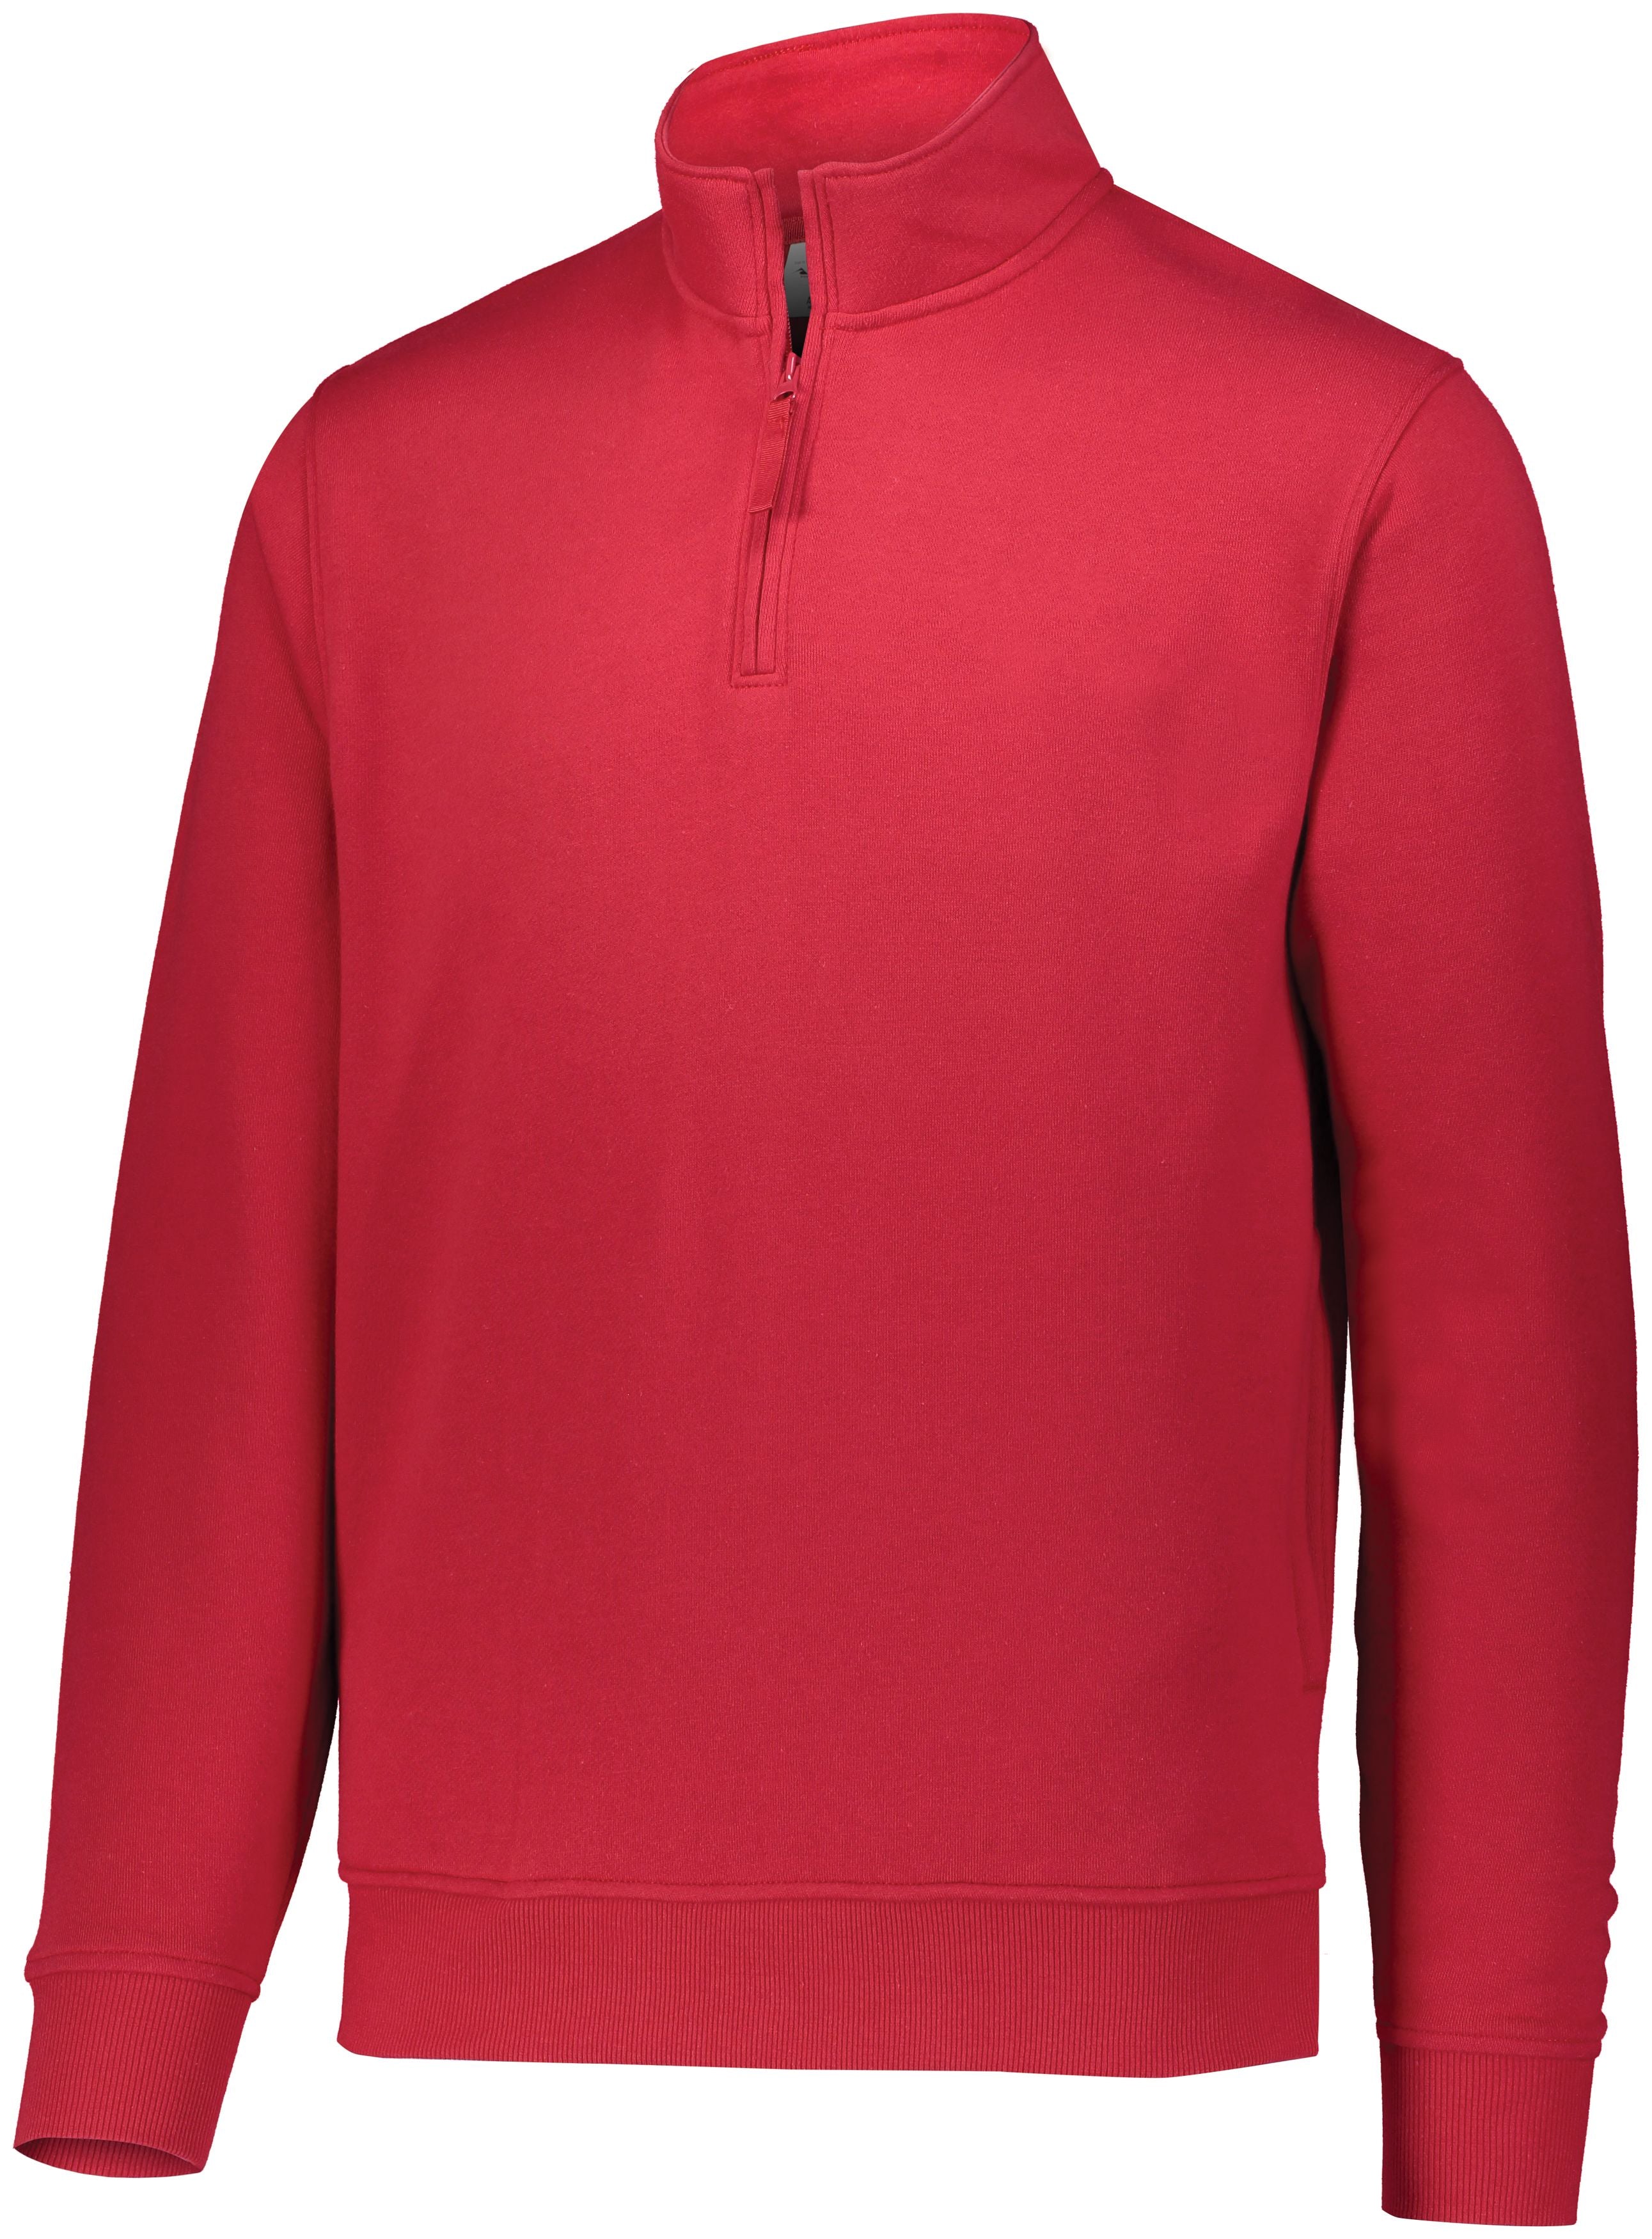 Augusta Sportswear 60/40 Fleece Pullover in Red  -Part of the Adult, Adult-Pullover, Augusta-Products, Outerwear product lines at KanaleyCreations.com